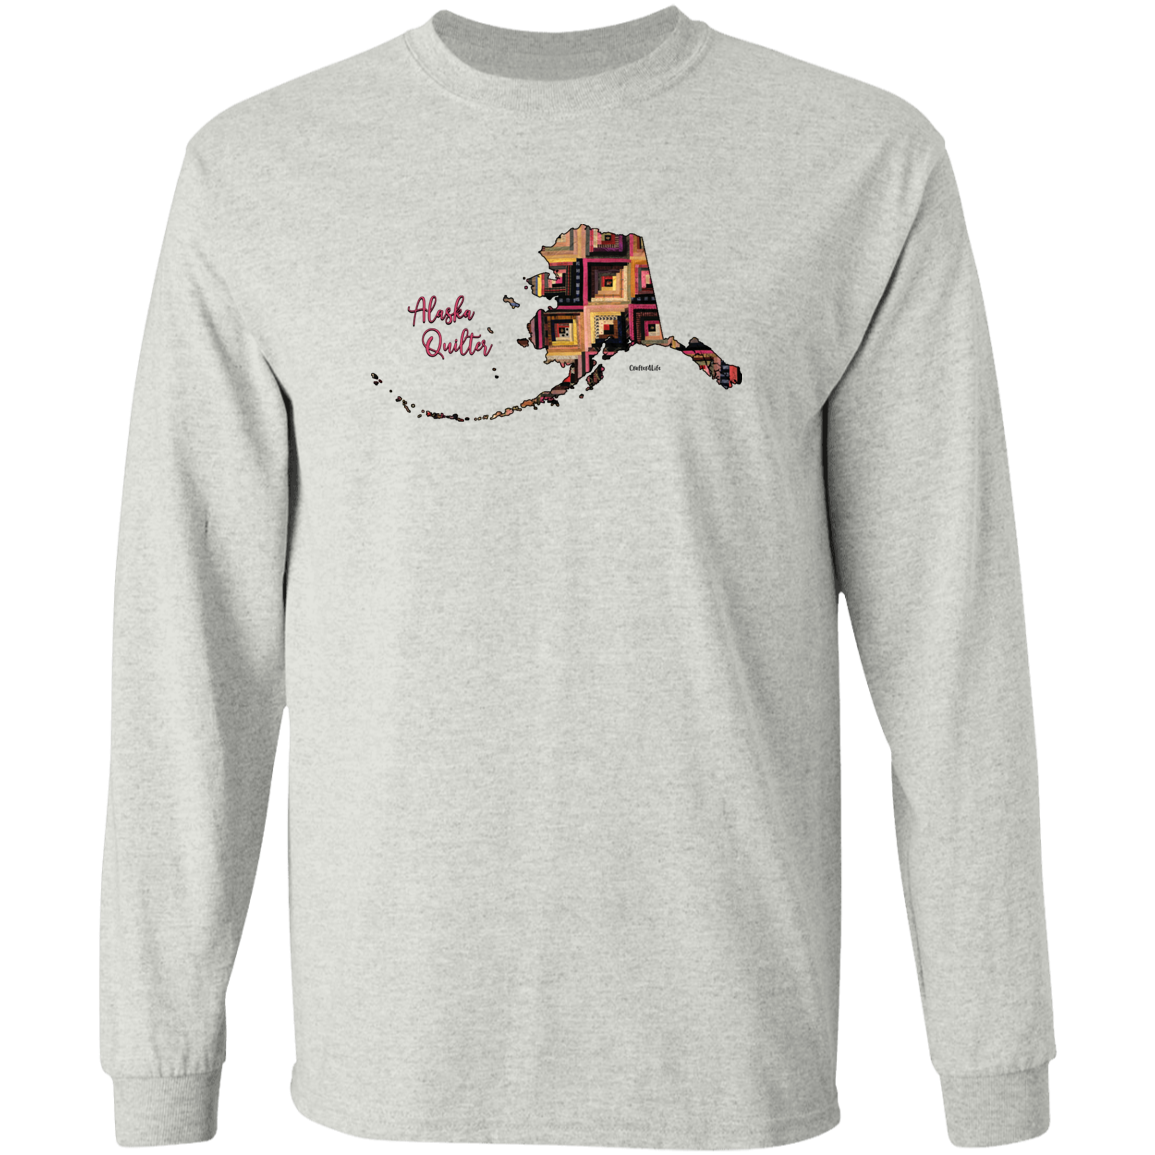 Alaska Quilter Long Sleeve T-Shirt, Gift for Quilting Friends and Family